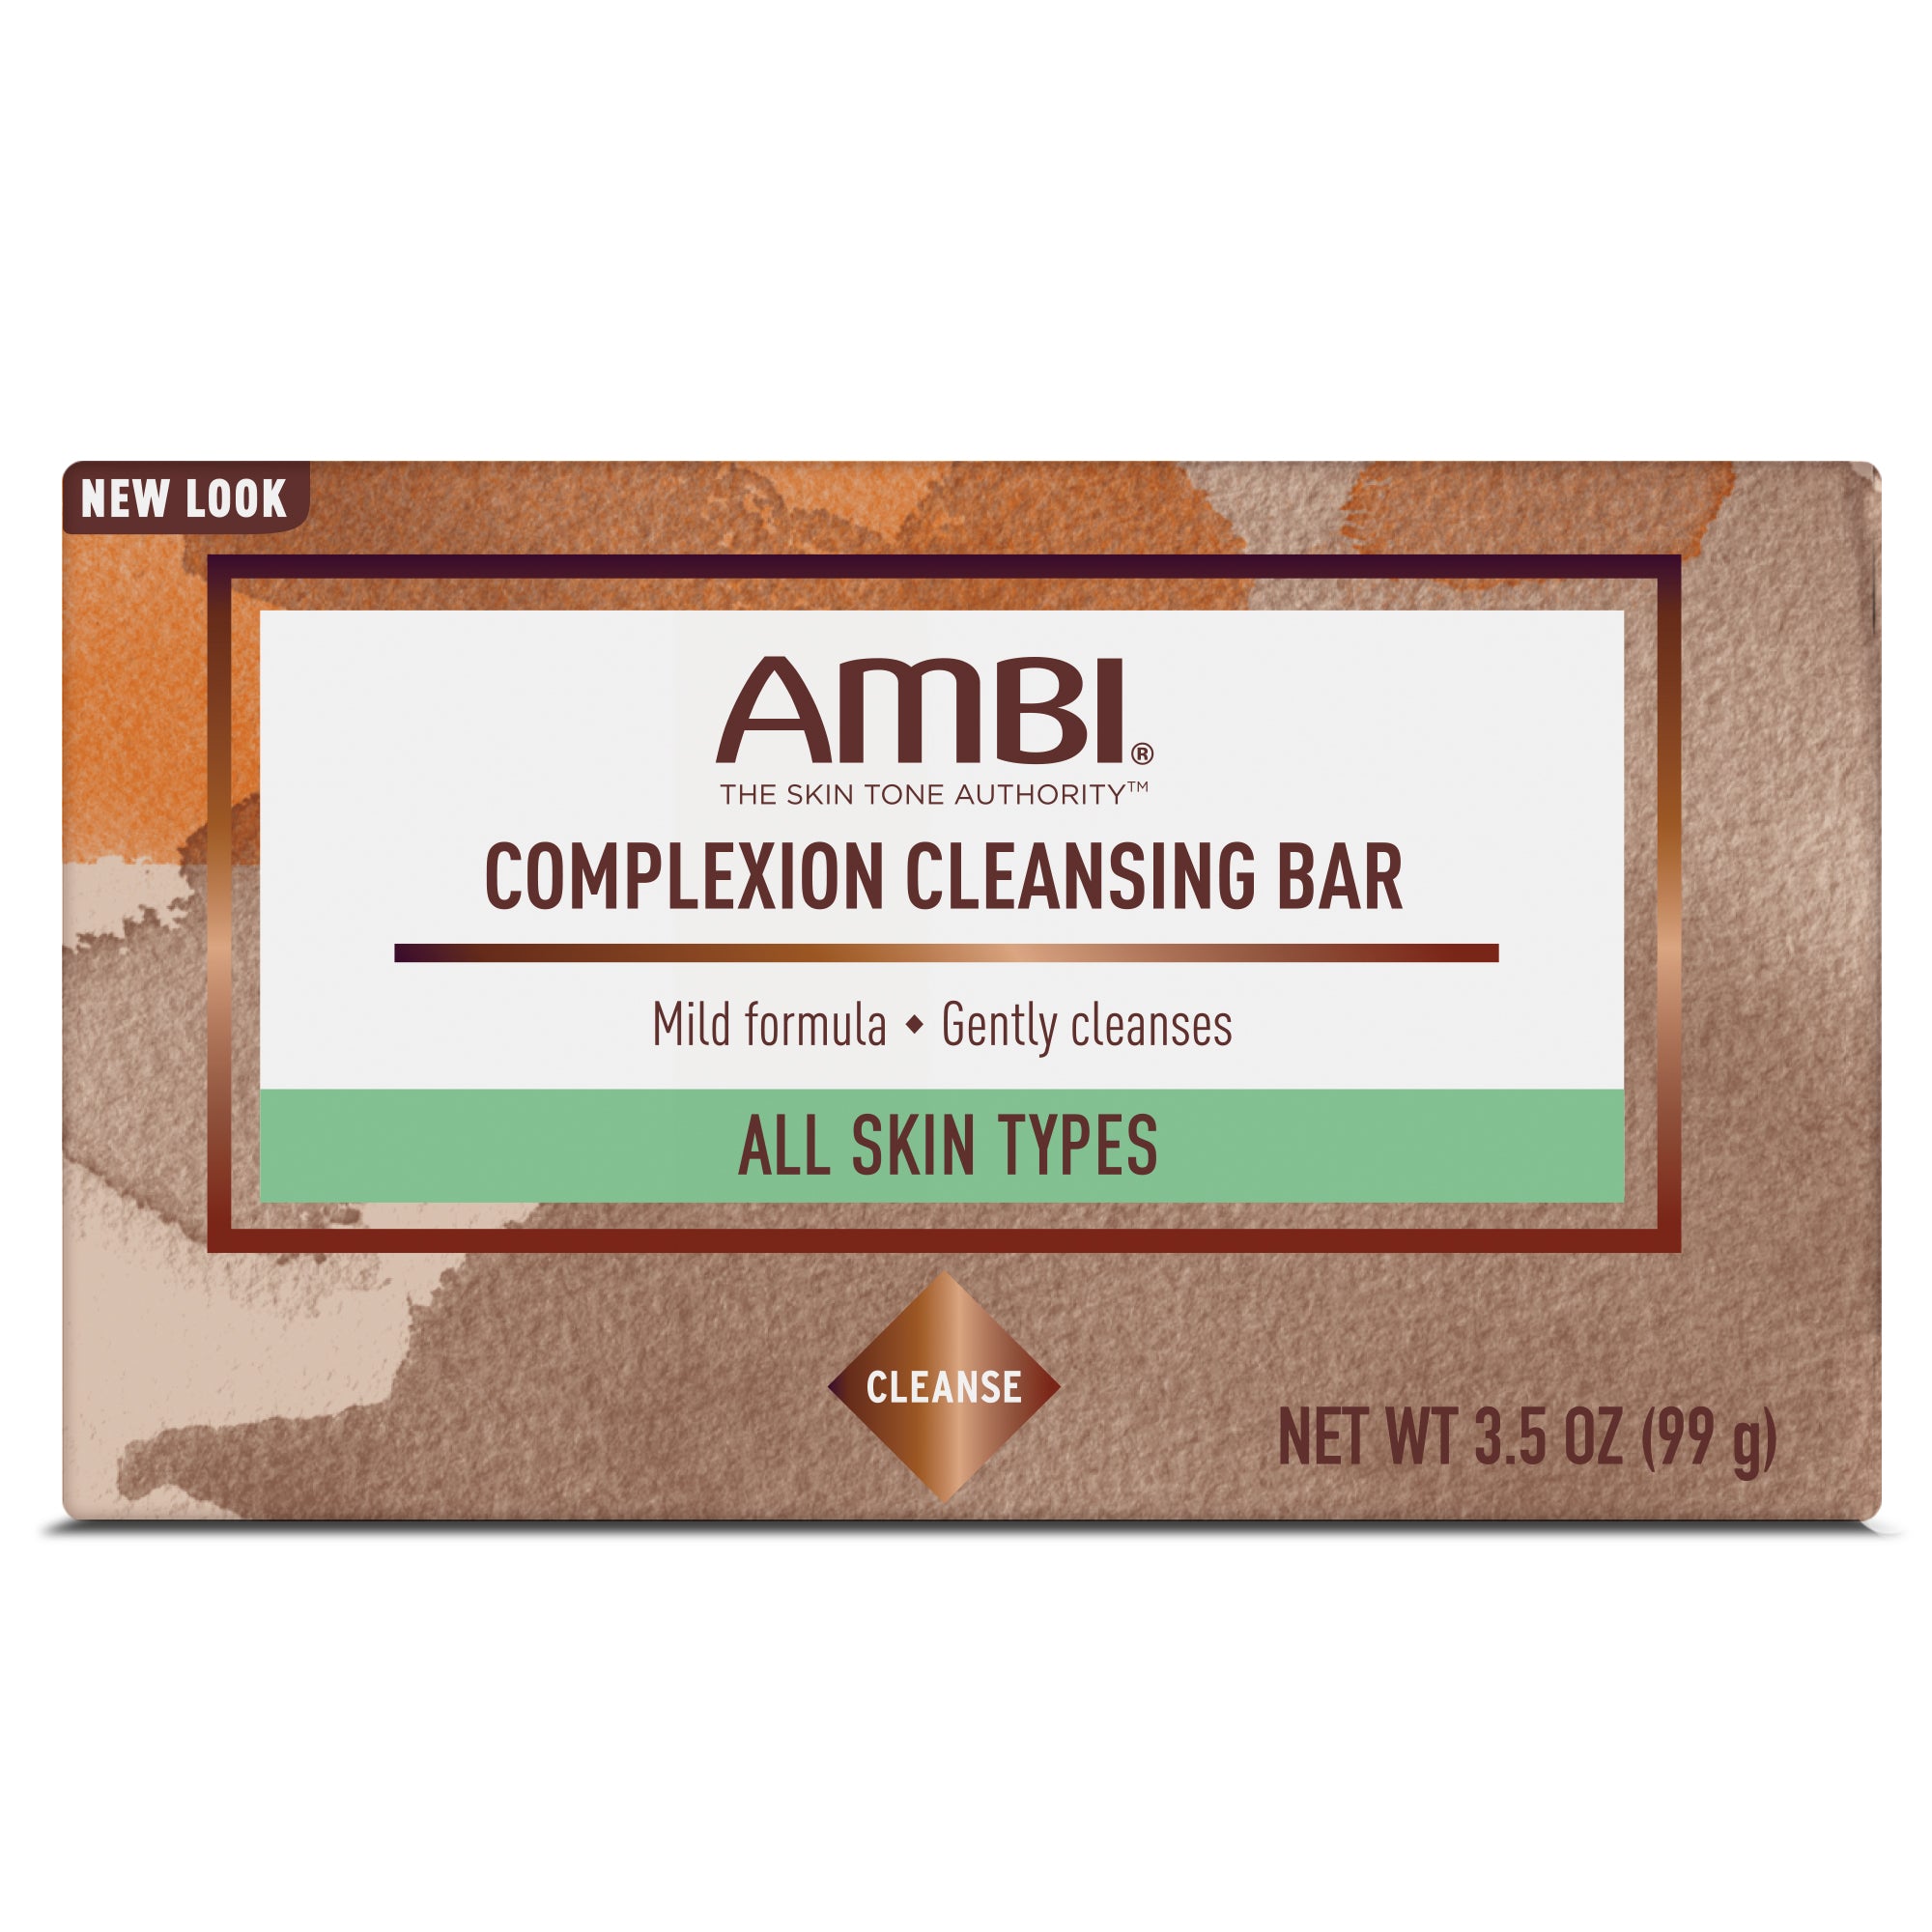 Award-Winning Clear and Even Tone Body Cleansing Bar